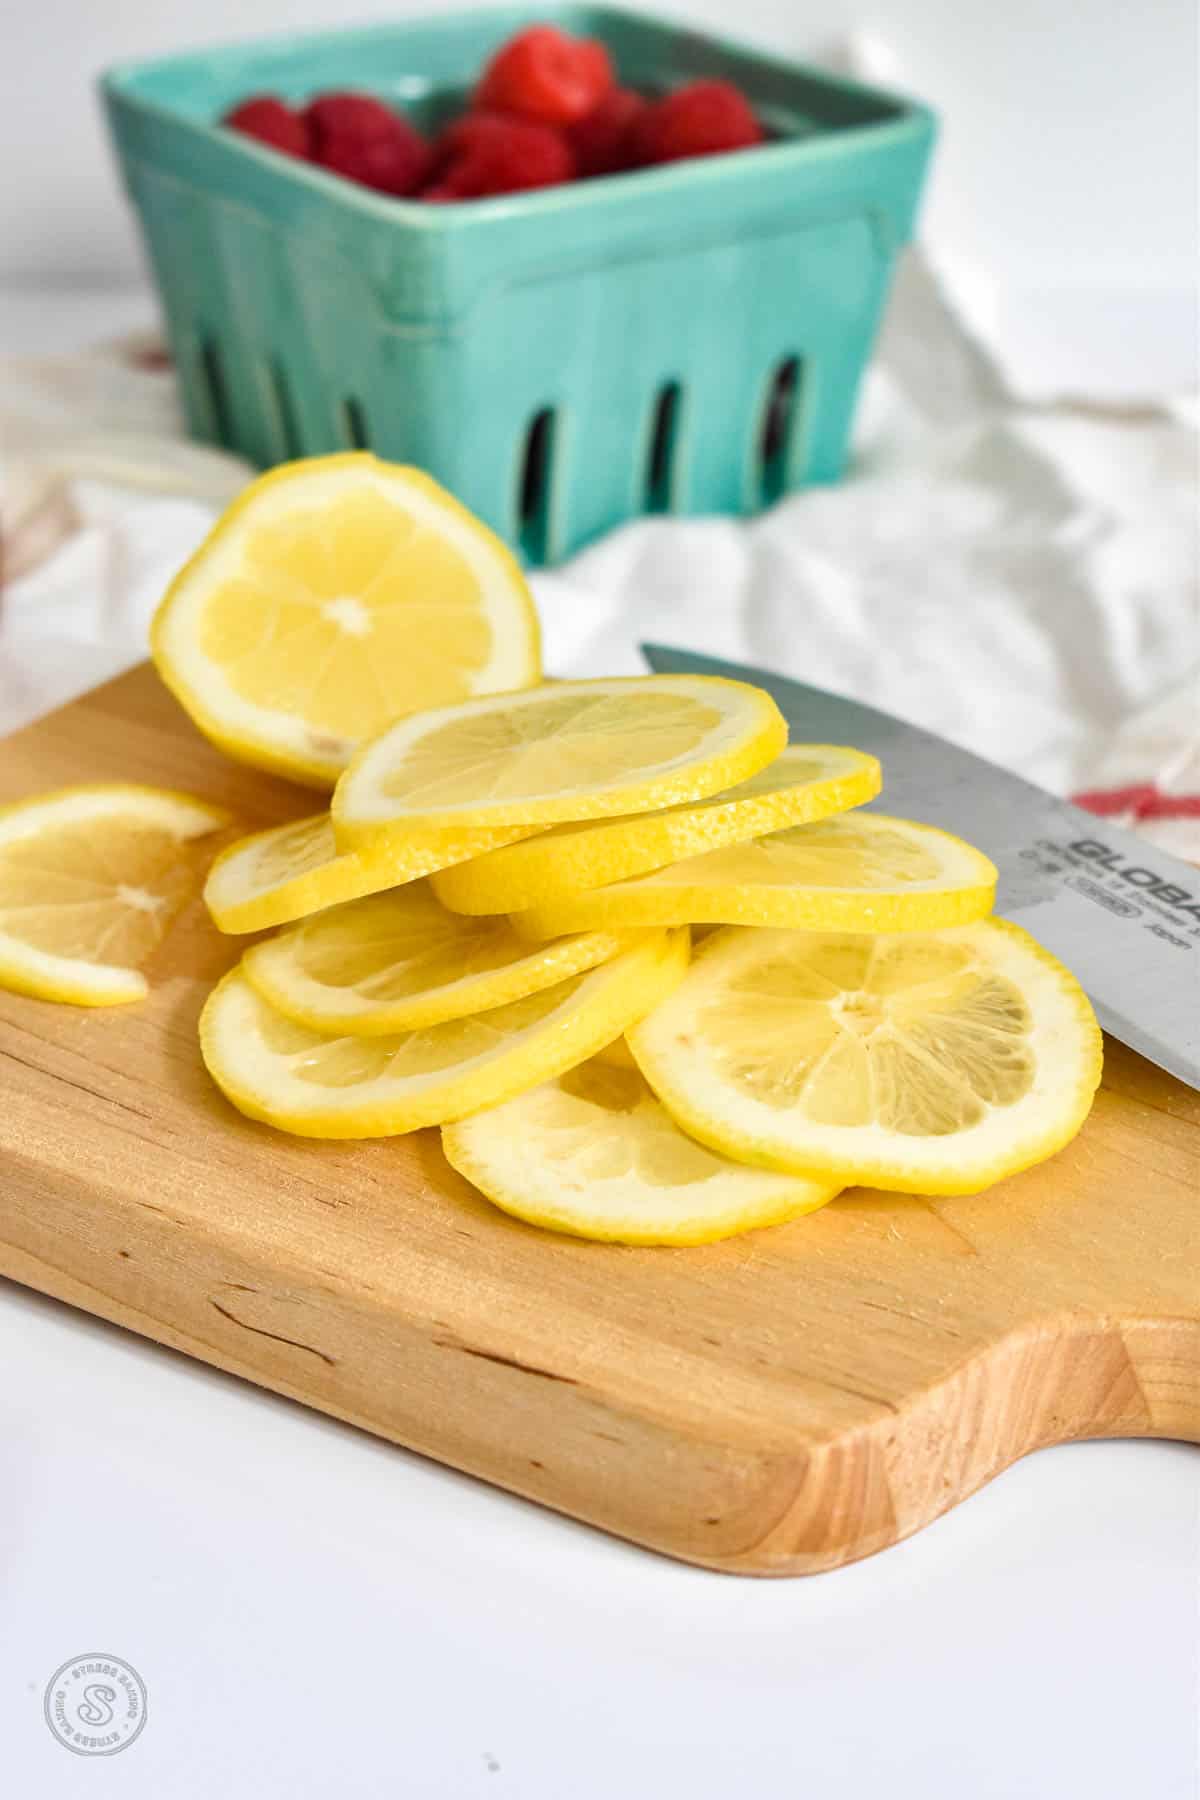 Thin slices of lemon on a small wooden cutting board